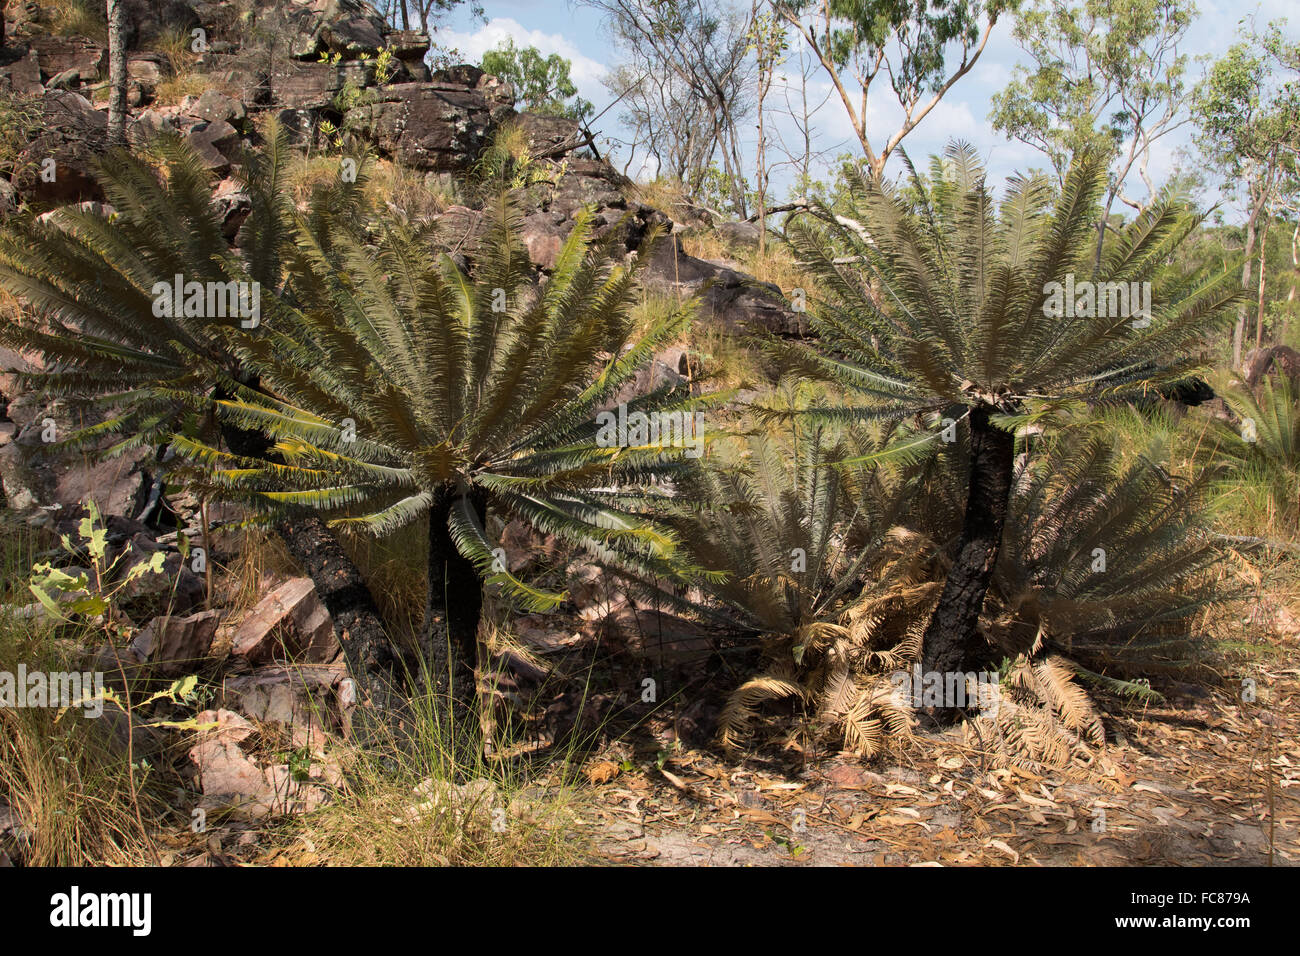 Cycads (Cycas calcicola) in dry sandstone country Stock Photo